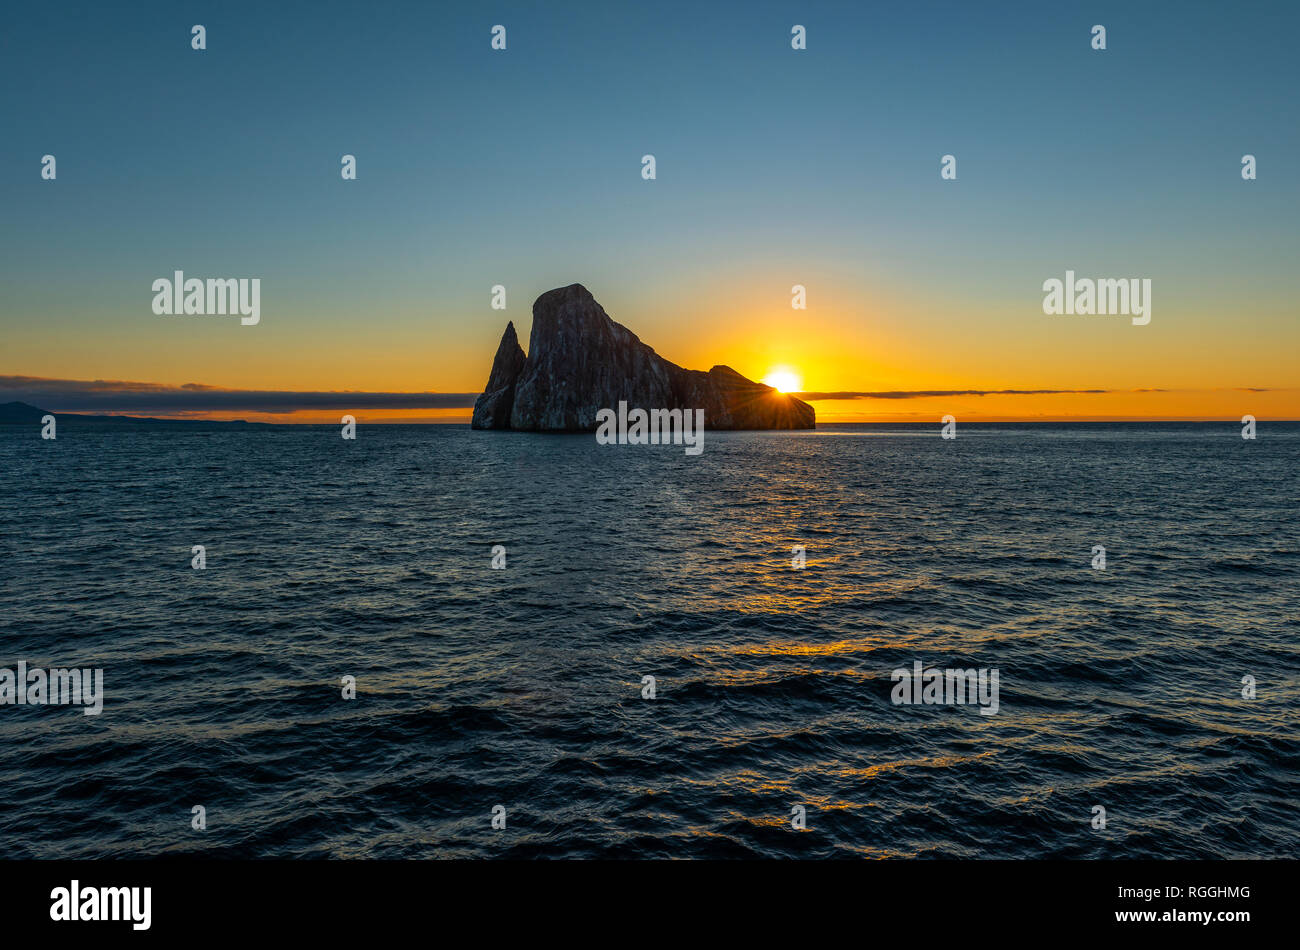 Landscape of the Kicker Rock stone formation at sunset, Galapagos Islands National Park, Ecuador. Stock Photo